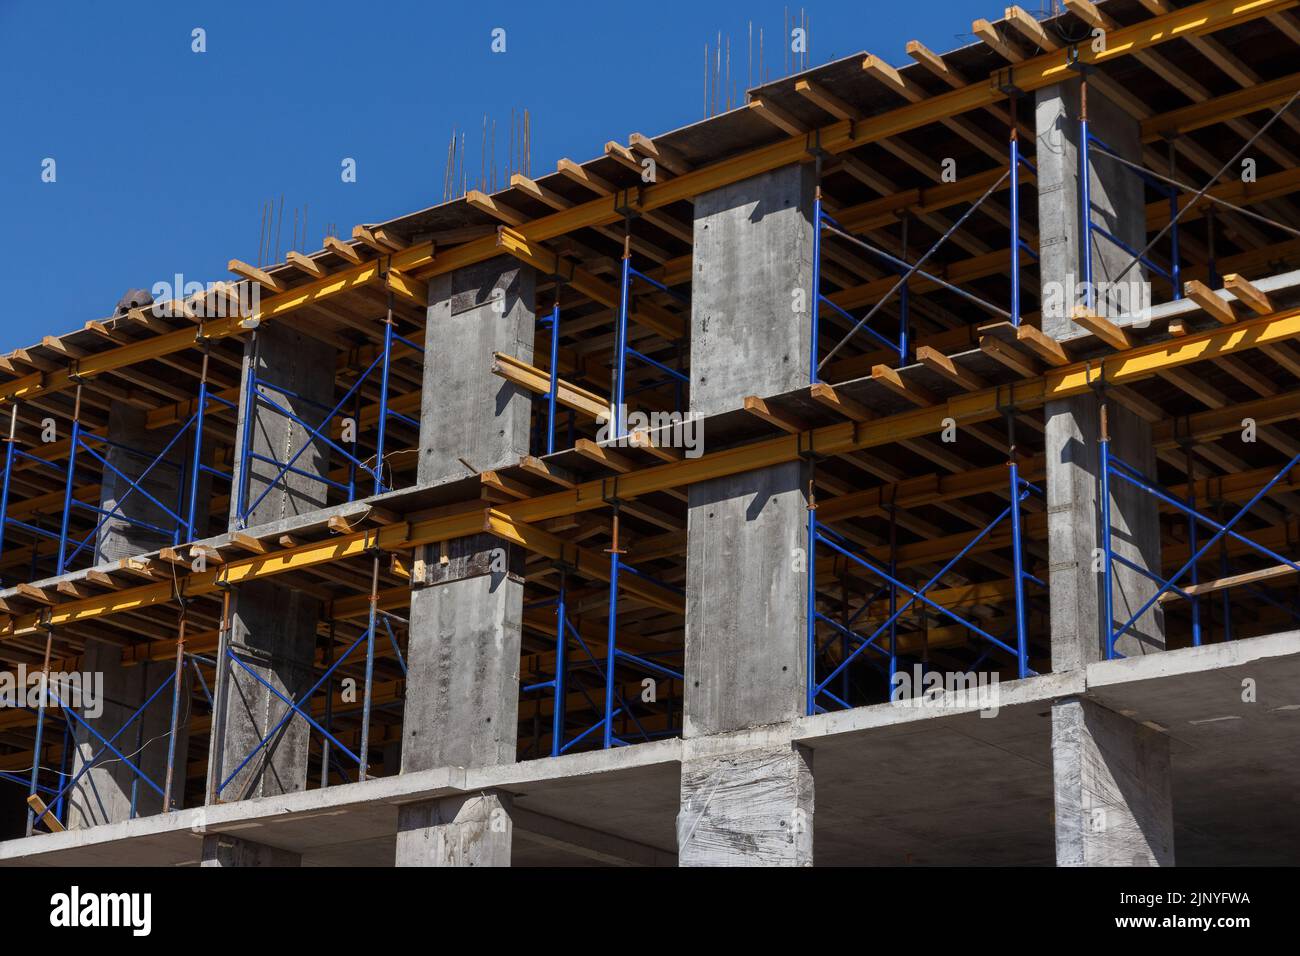 Construction of a residential building. Part of urban real estate and architecture. Facade of a residential building. Stock Photo